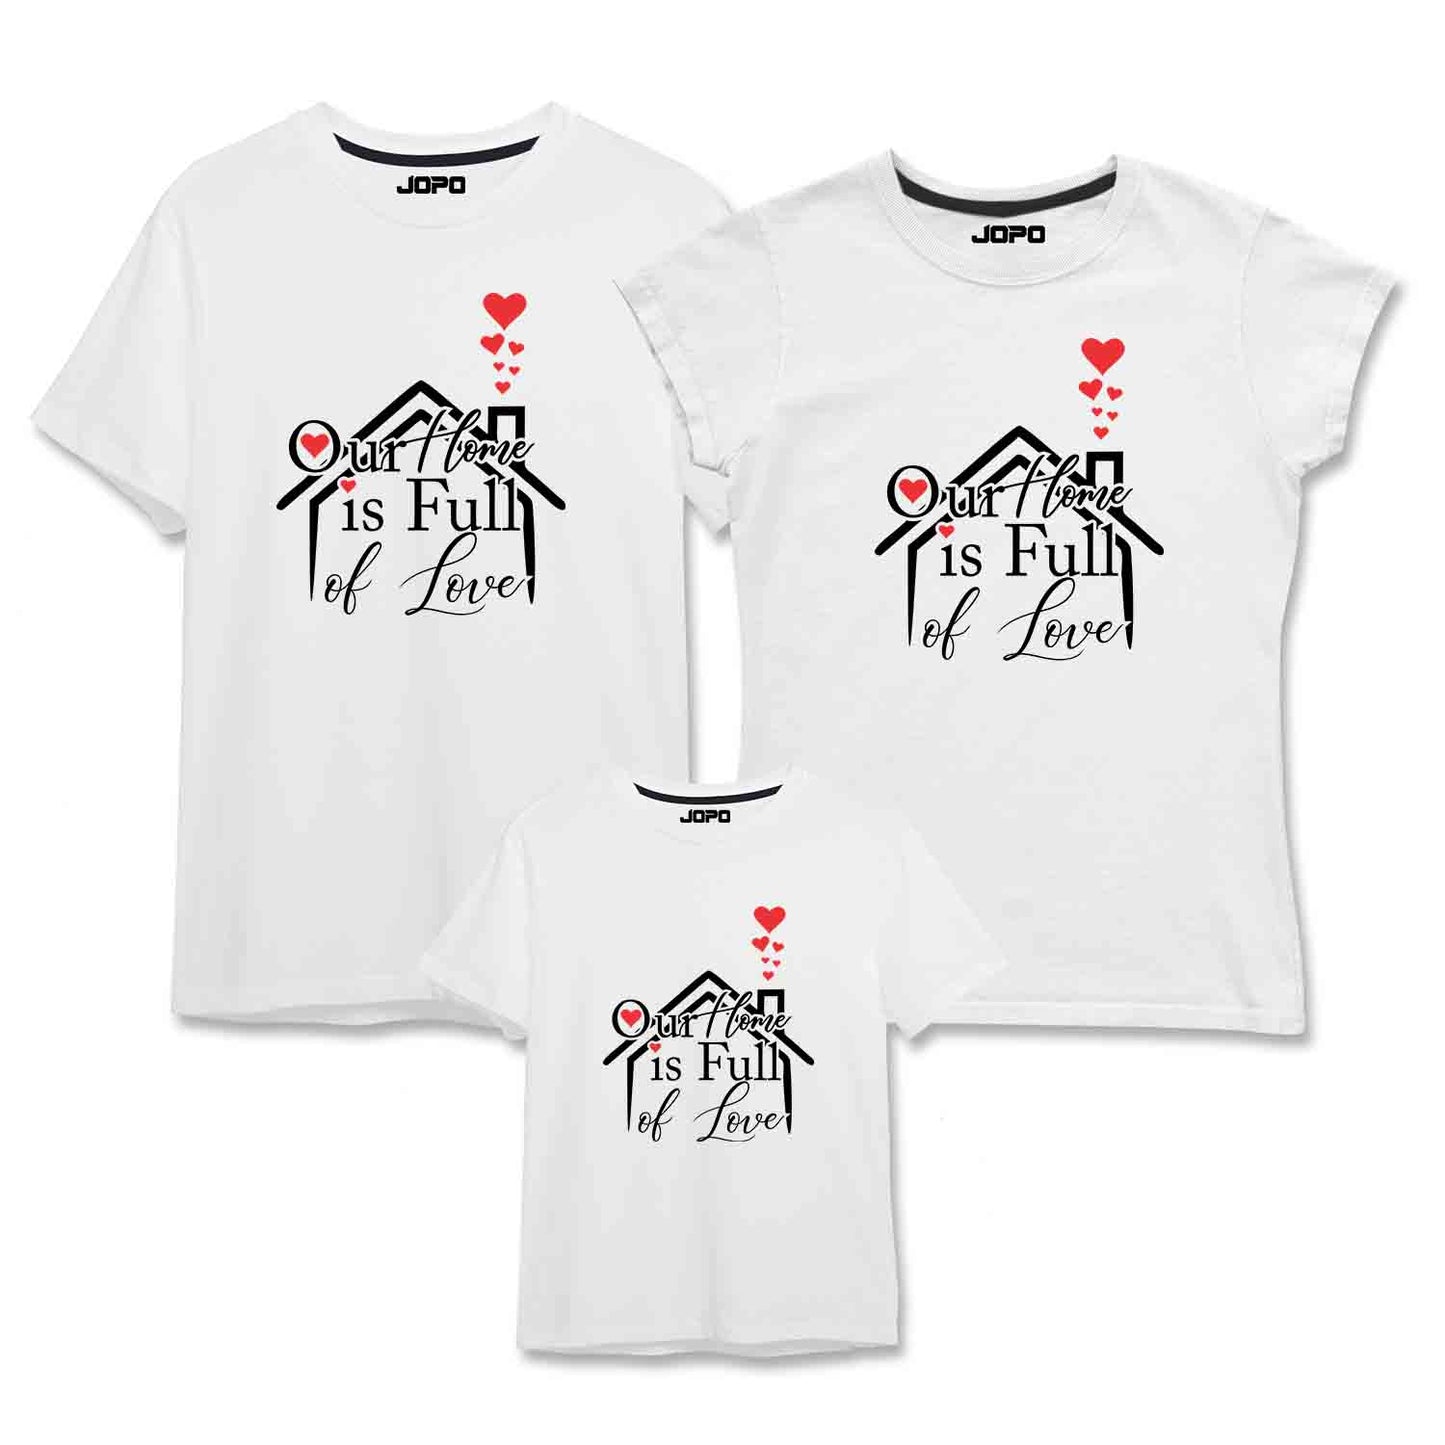 Our Home is Full of Love Matching Family T-Shirts Set of 3 and 4 for Mom, Dad, Son & Daughter